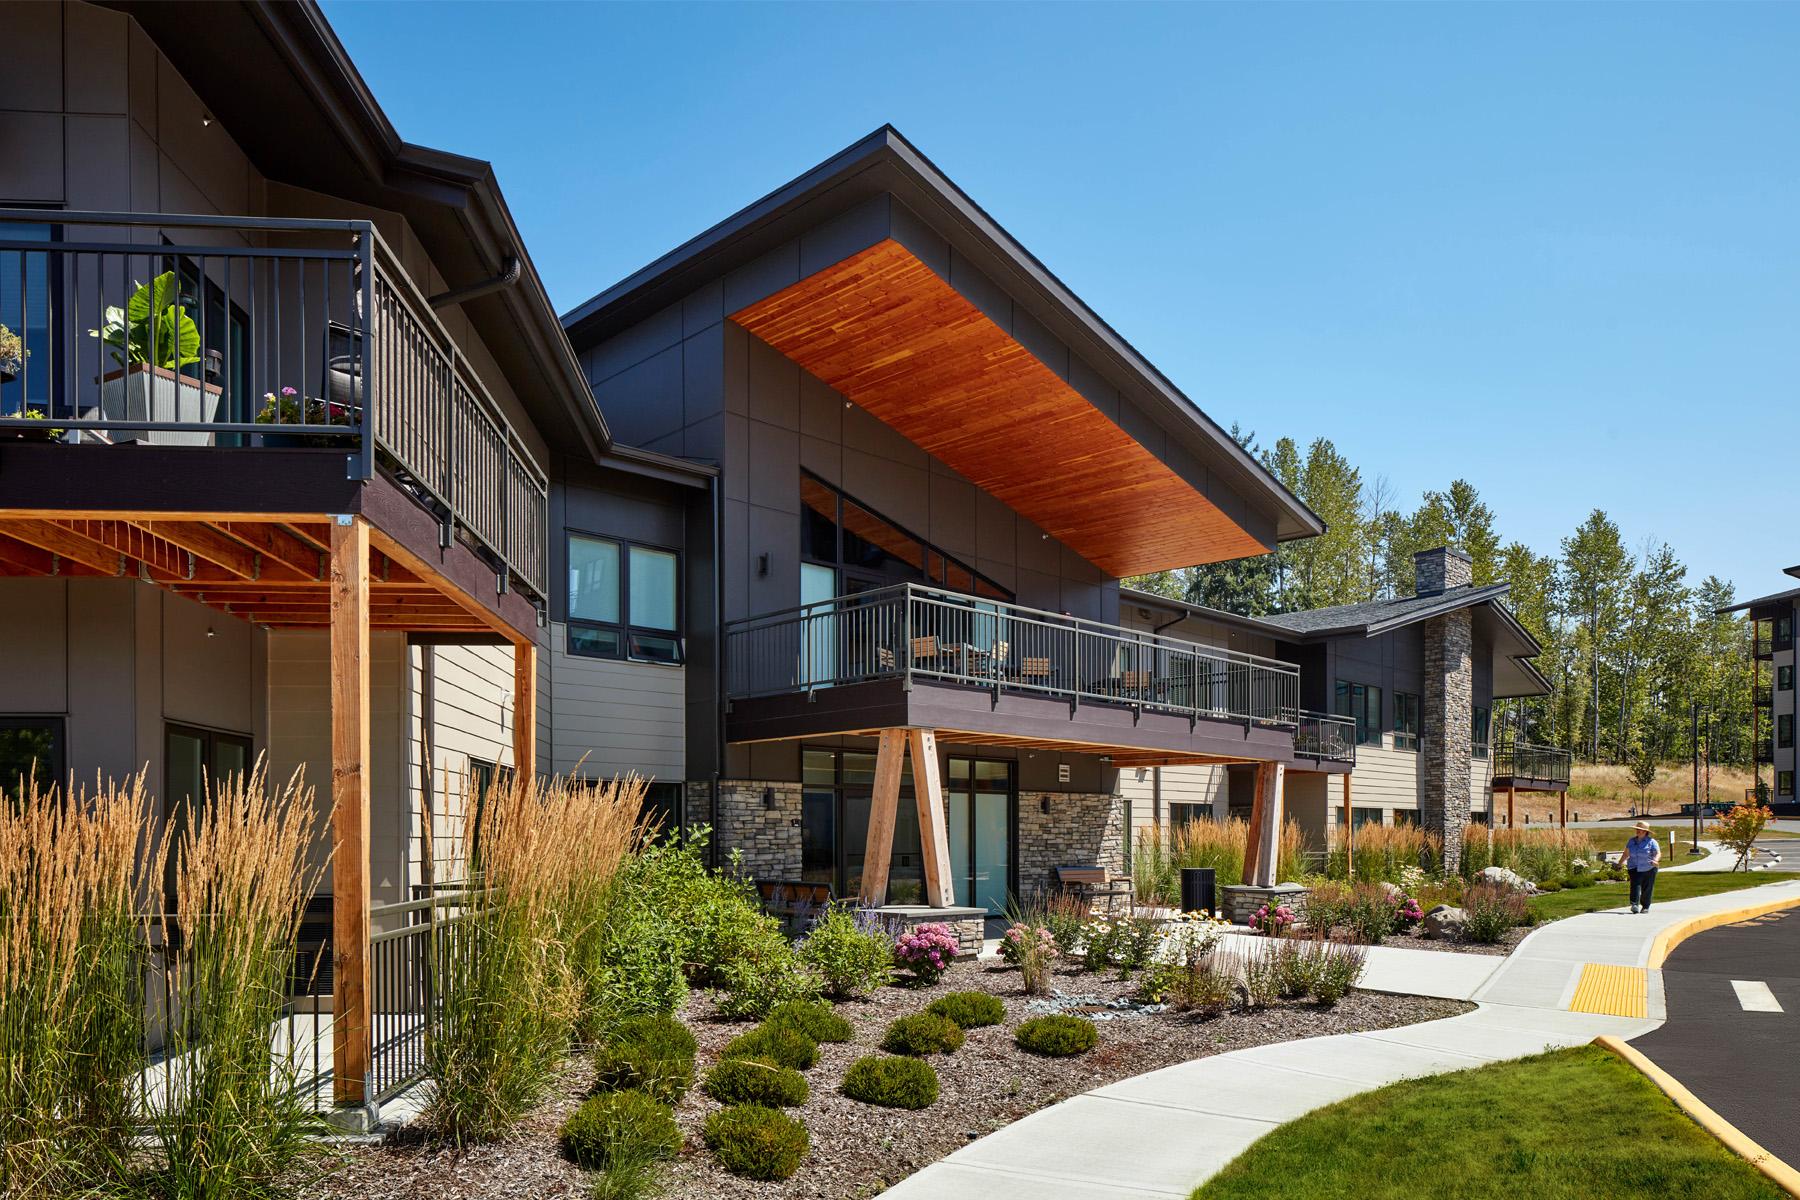 An exterior view of Wesley at Tehaleh, a senior living community located within the master-planned community of Tehaleh by Newland in Bonney Lake, Wash.